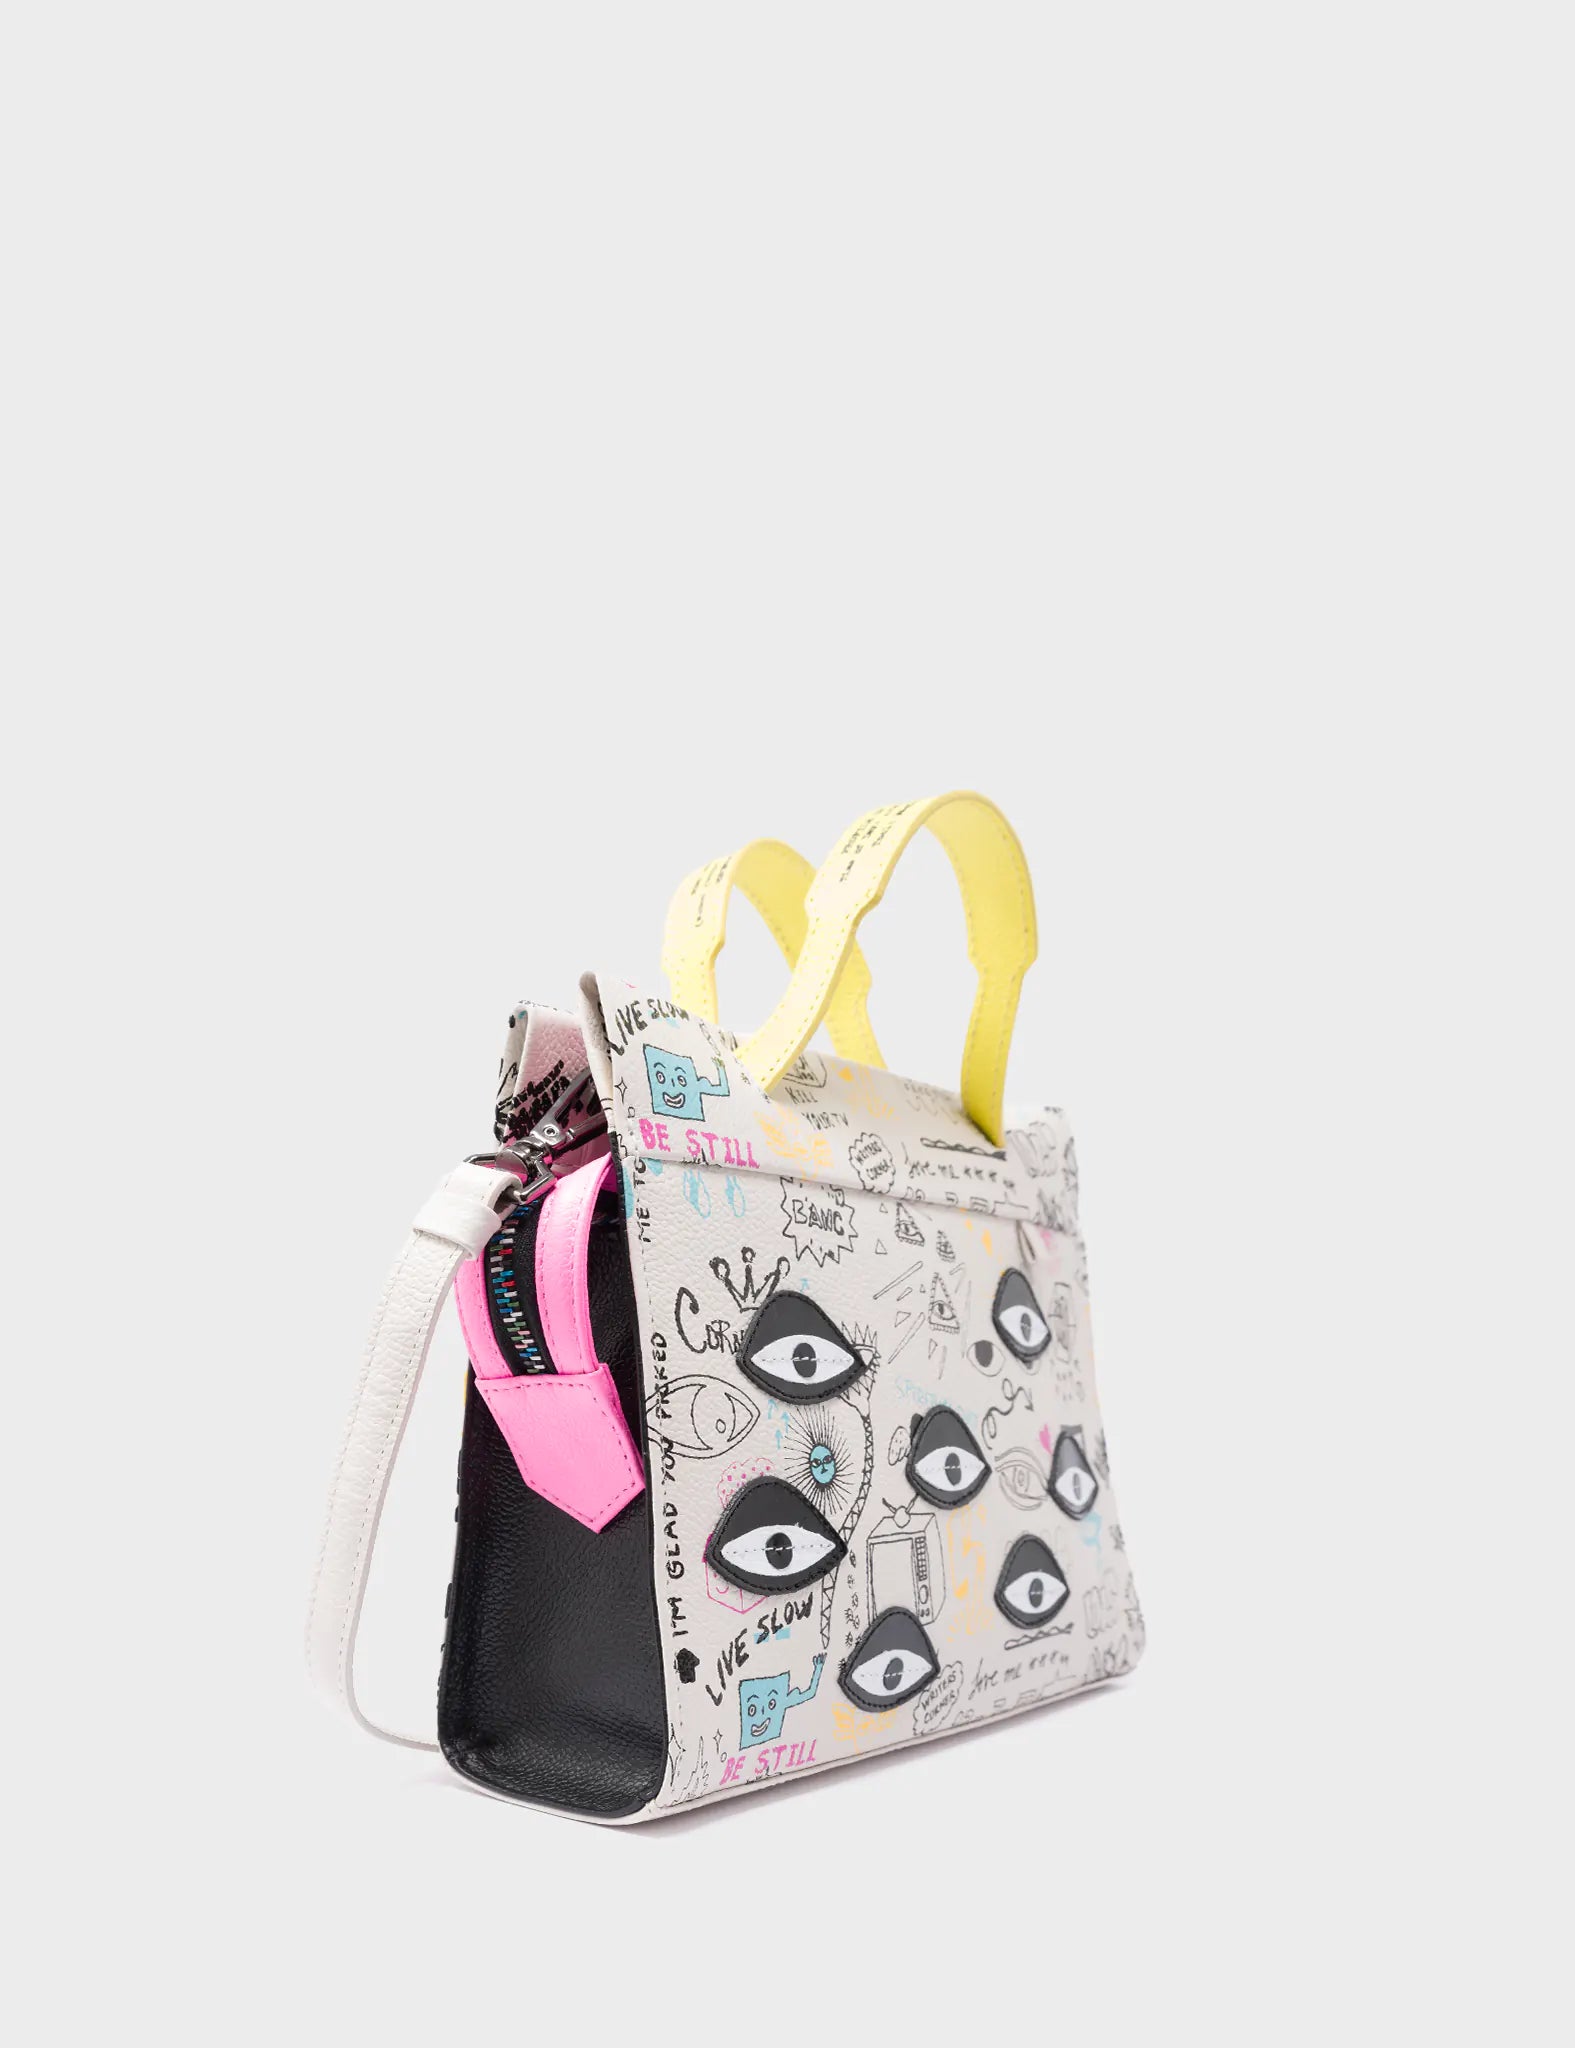 Vali Crossbody Small Cream Leather Bag - Urban Doodles Print and Eyes Applique - Side Corner View